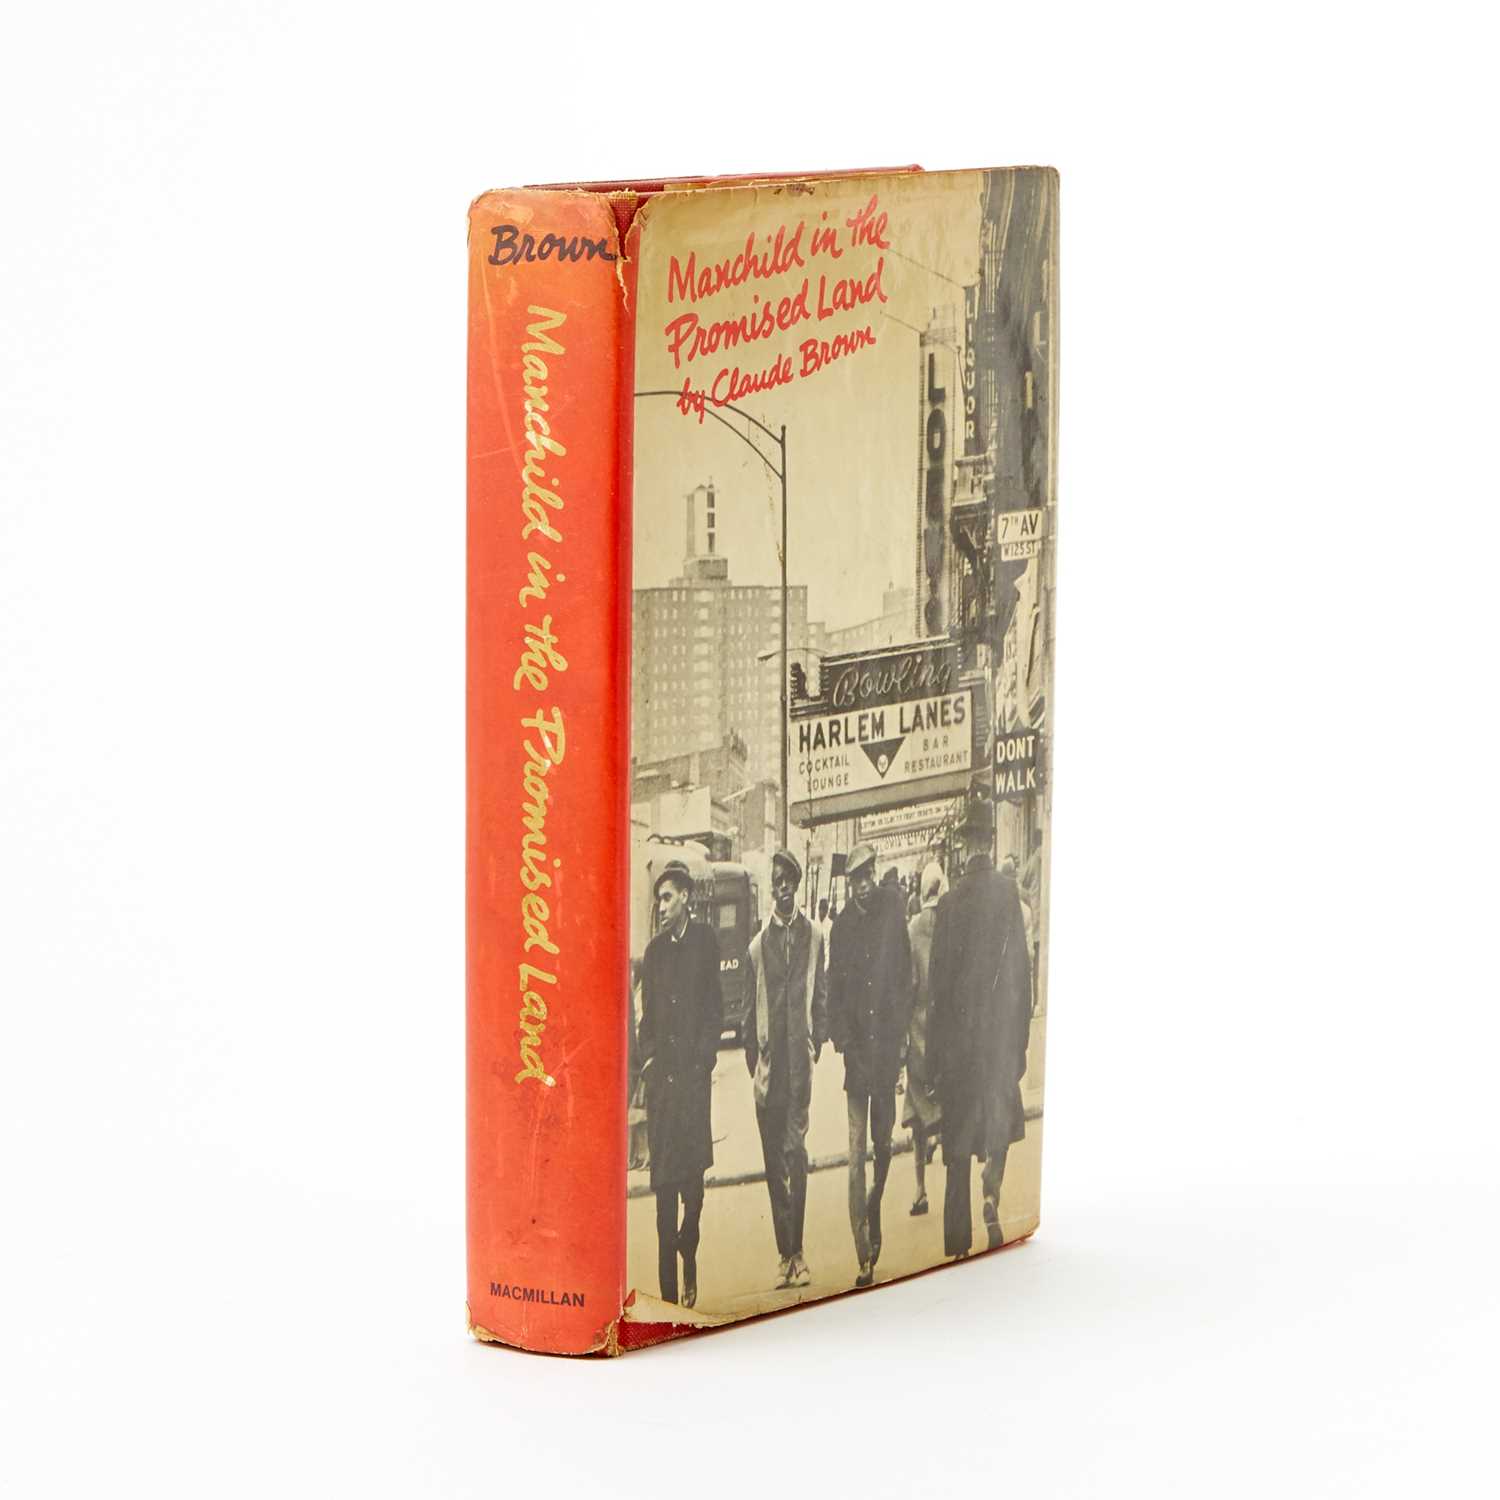 Lot 264 - Brown's Manchild in the Promised Land, inscribed